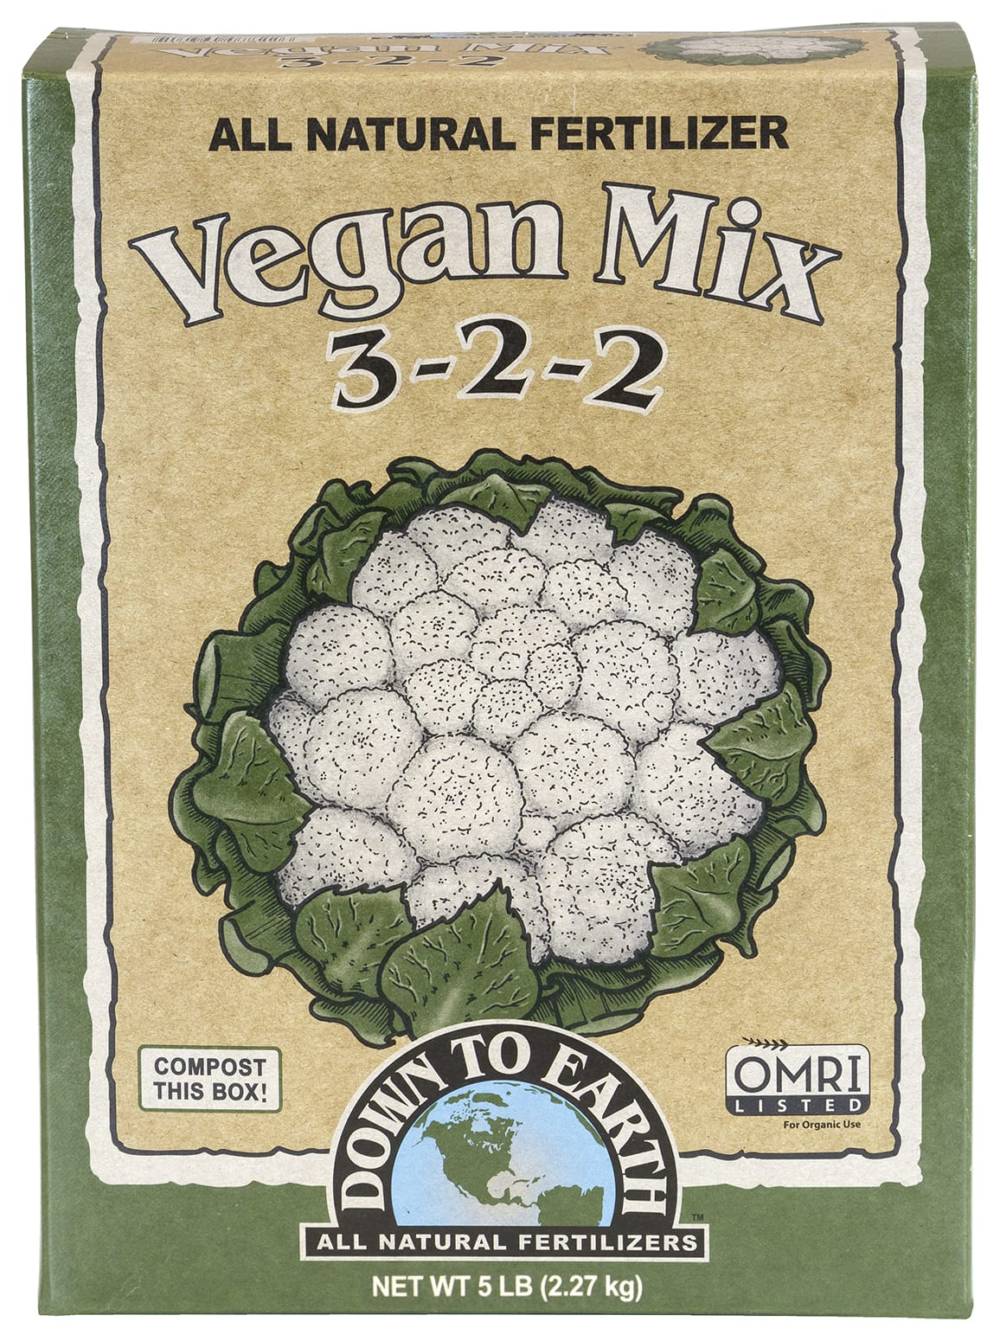 Box of Down To Earth Vegan Mix